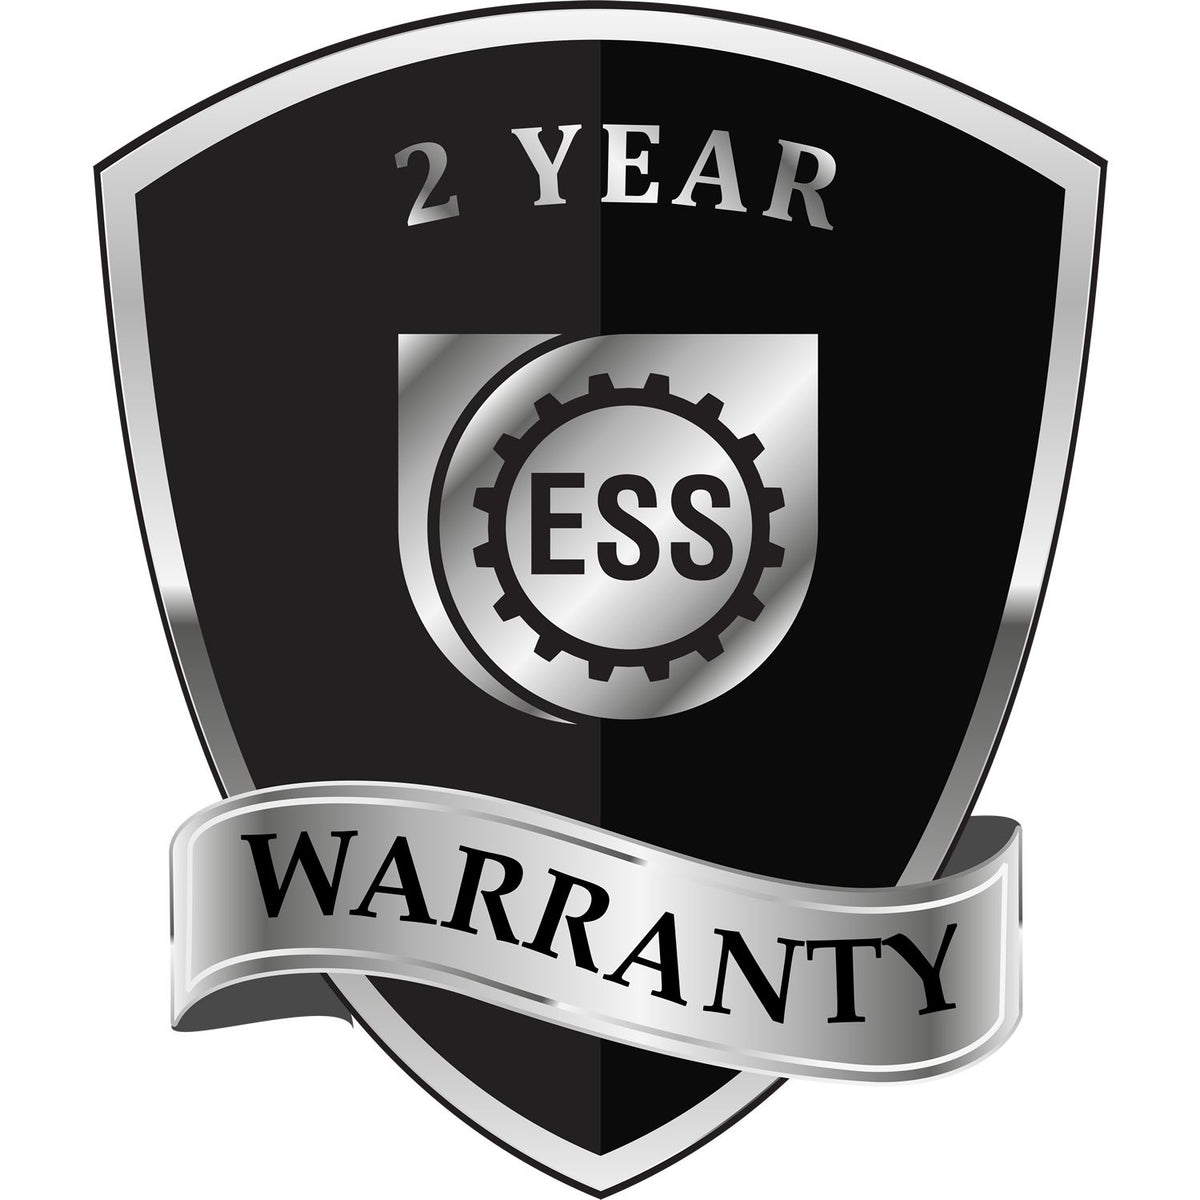 A black and silver badge or emblem showing warranty information for the Hybrid Wyoming Engineer Seal